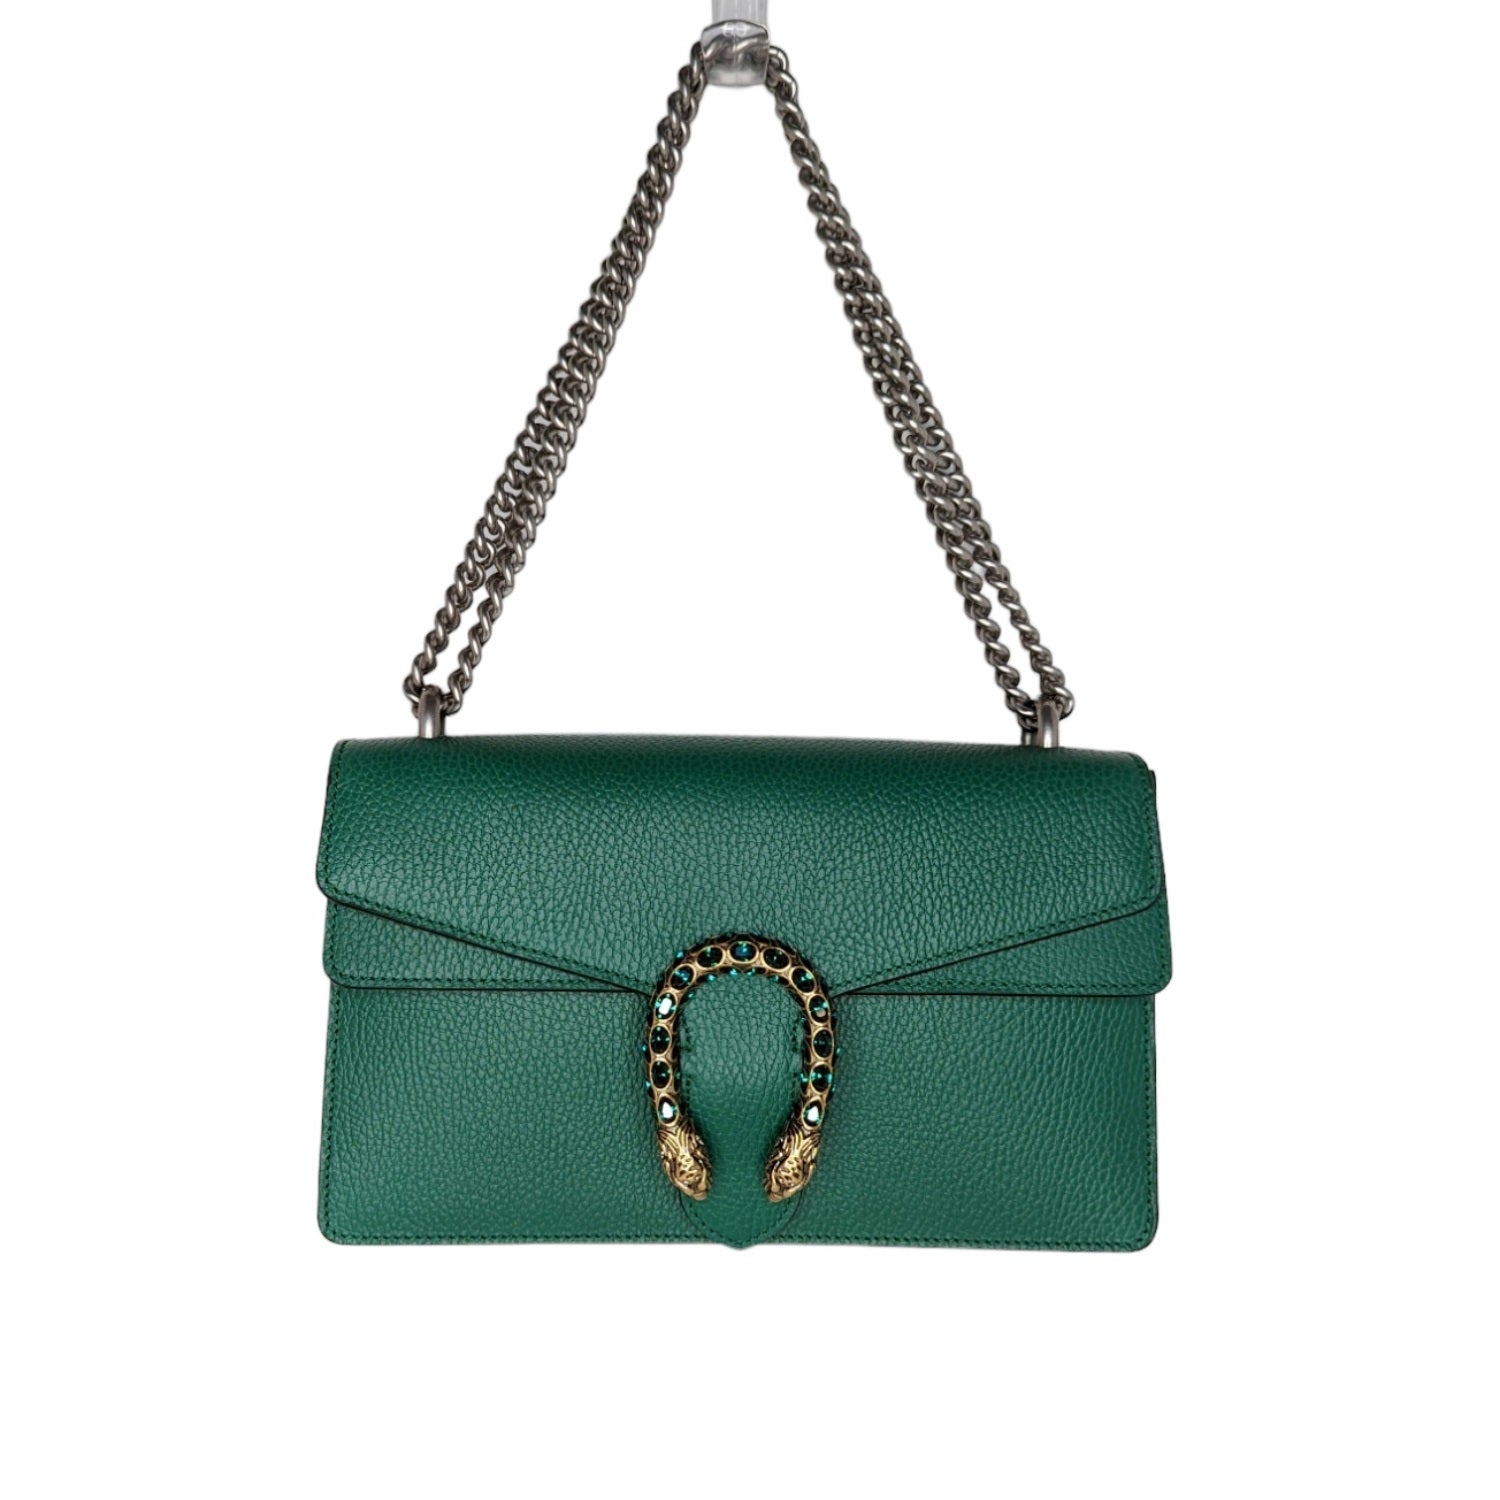 Gucci Emerald Green Leather Dionysus Bag | The ReLux